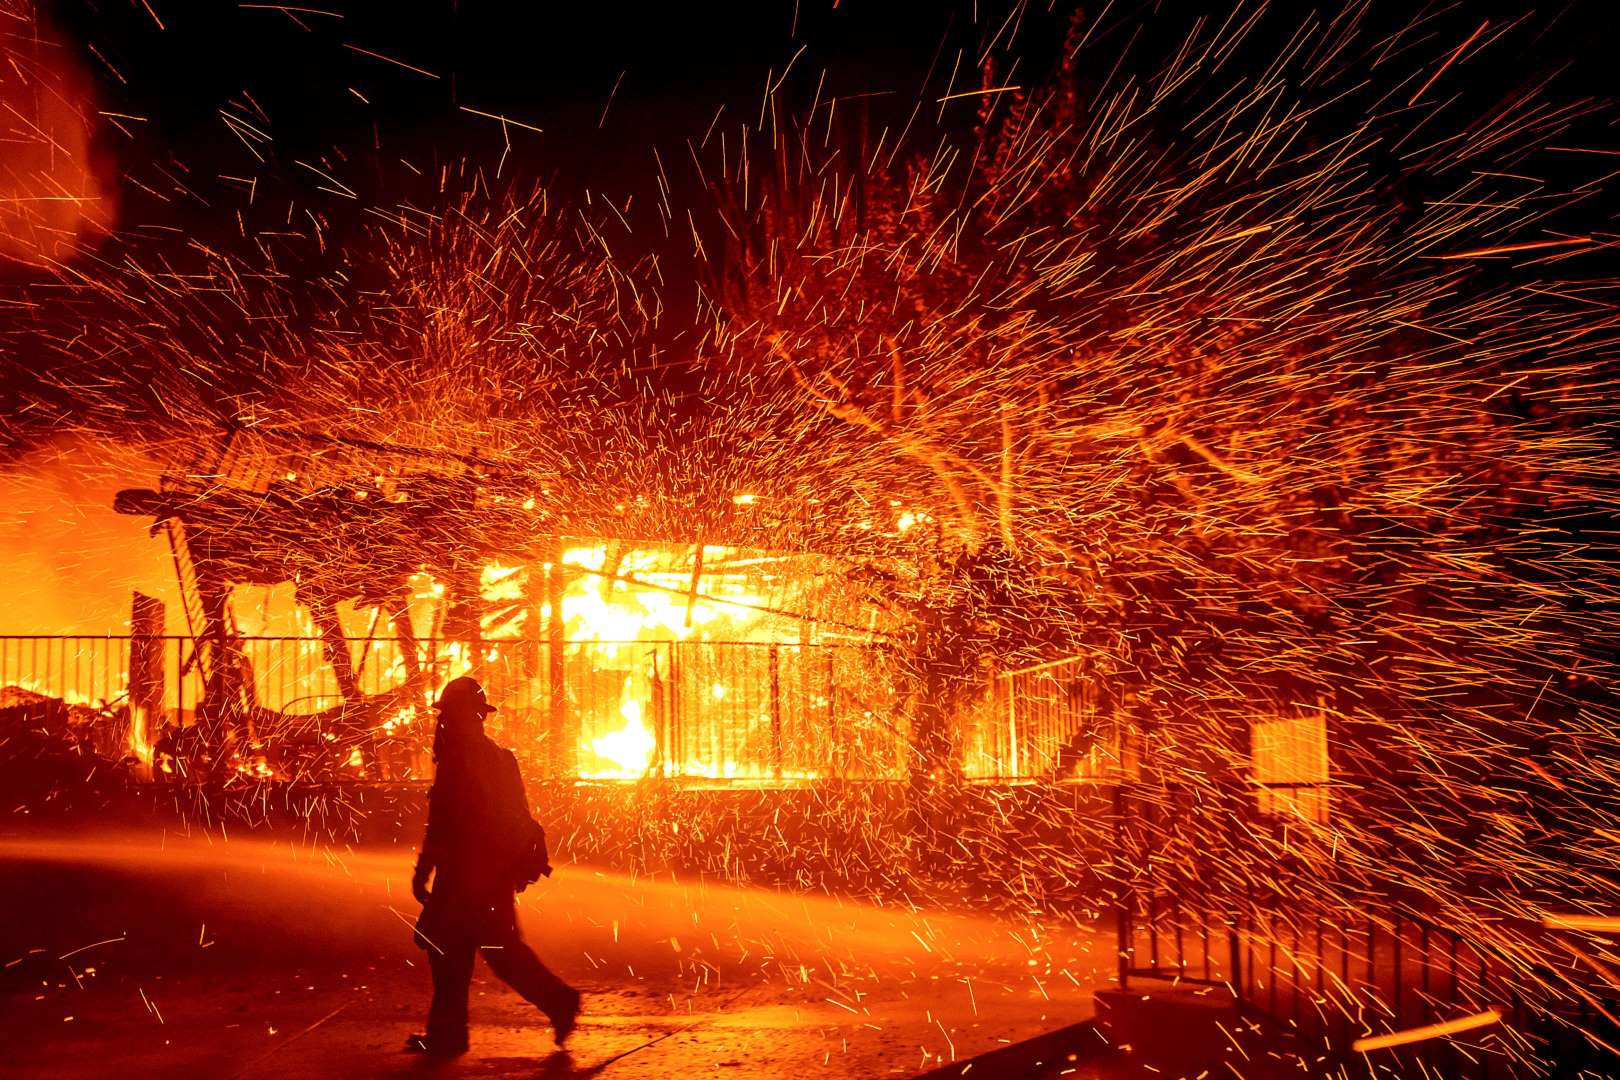 A firefighter passes a burning home as the Hillside fire burns in San Bernardino, California, on Thursday, 31 October 2019. The blaze, which ignited during red flag fire danger warnings, destroyed multiple residences. Photo: Noah Berger / AP Photo